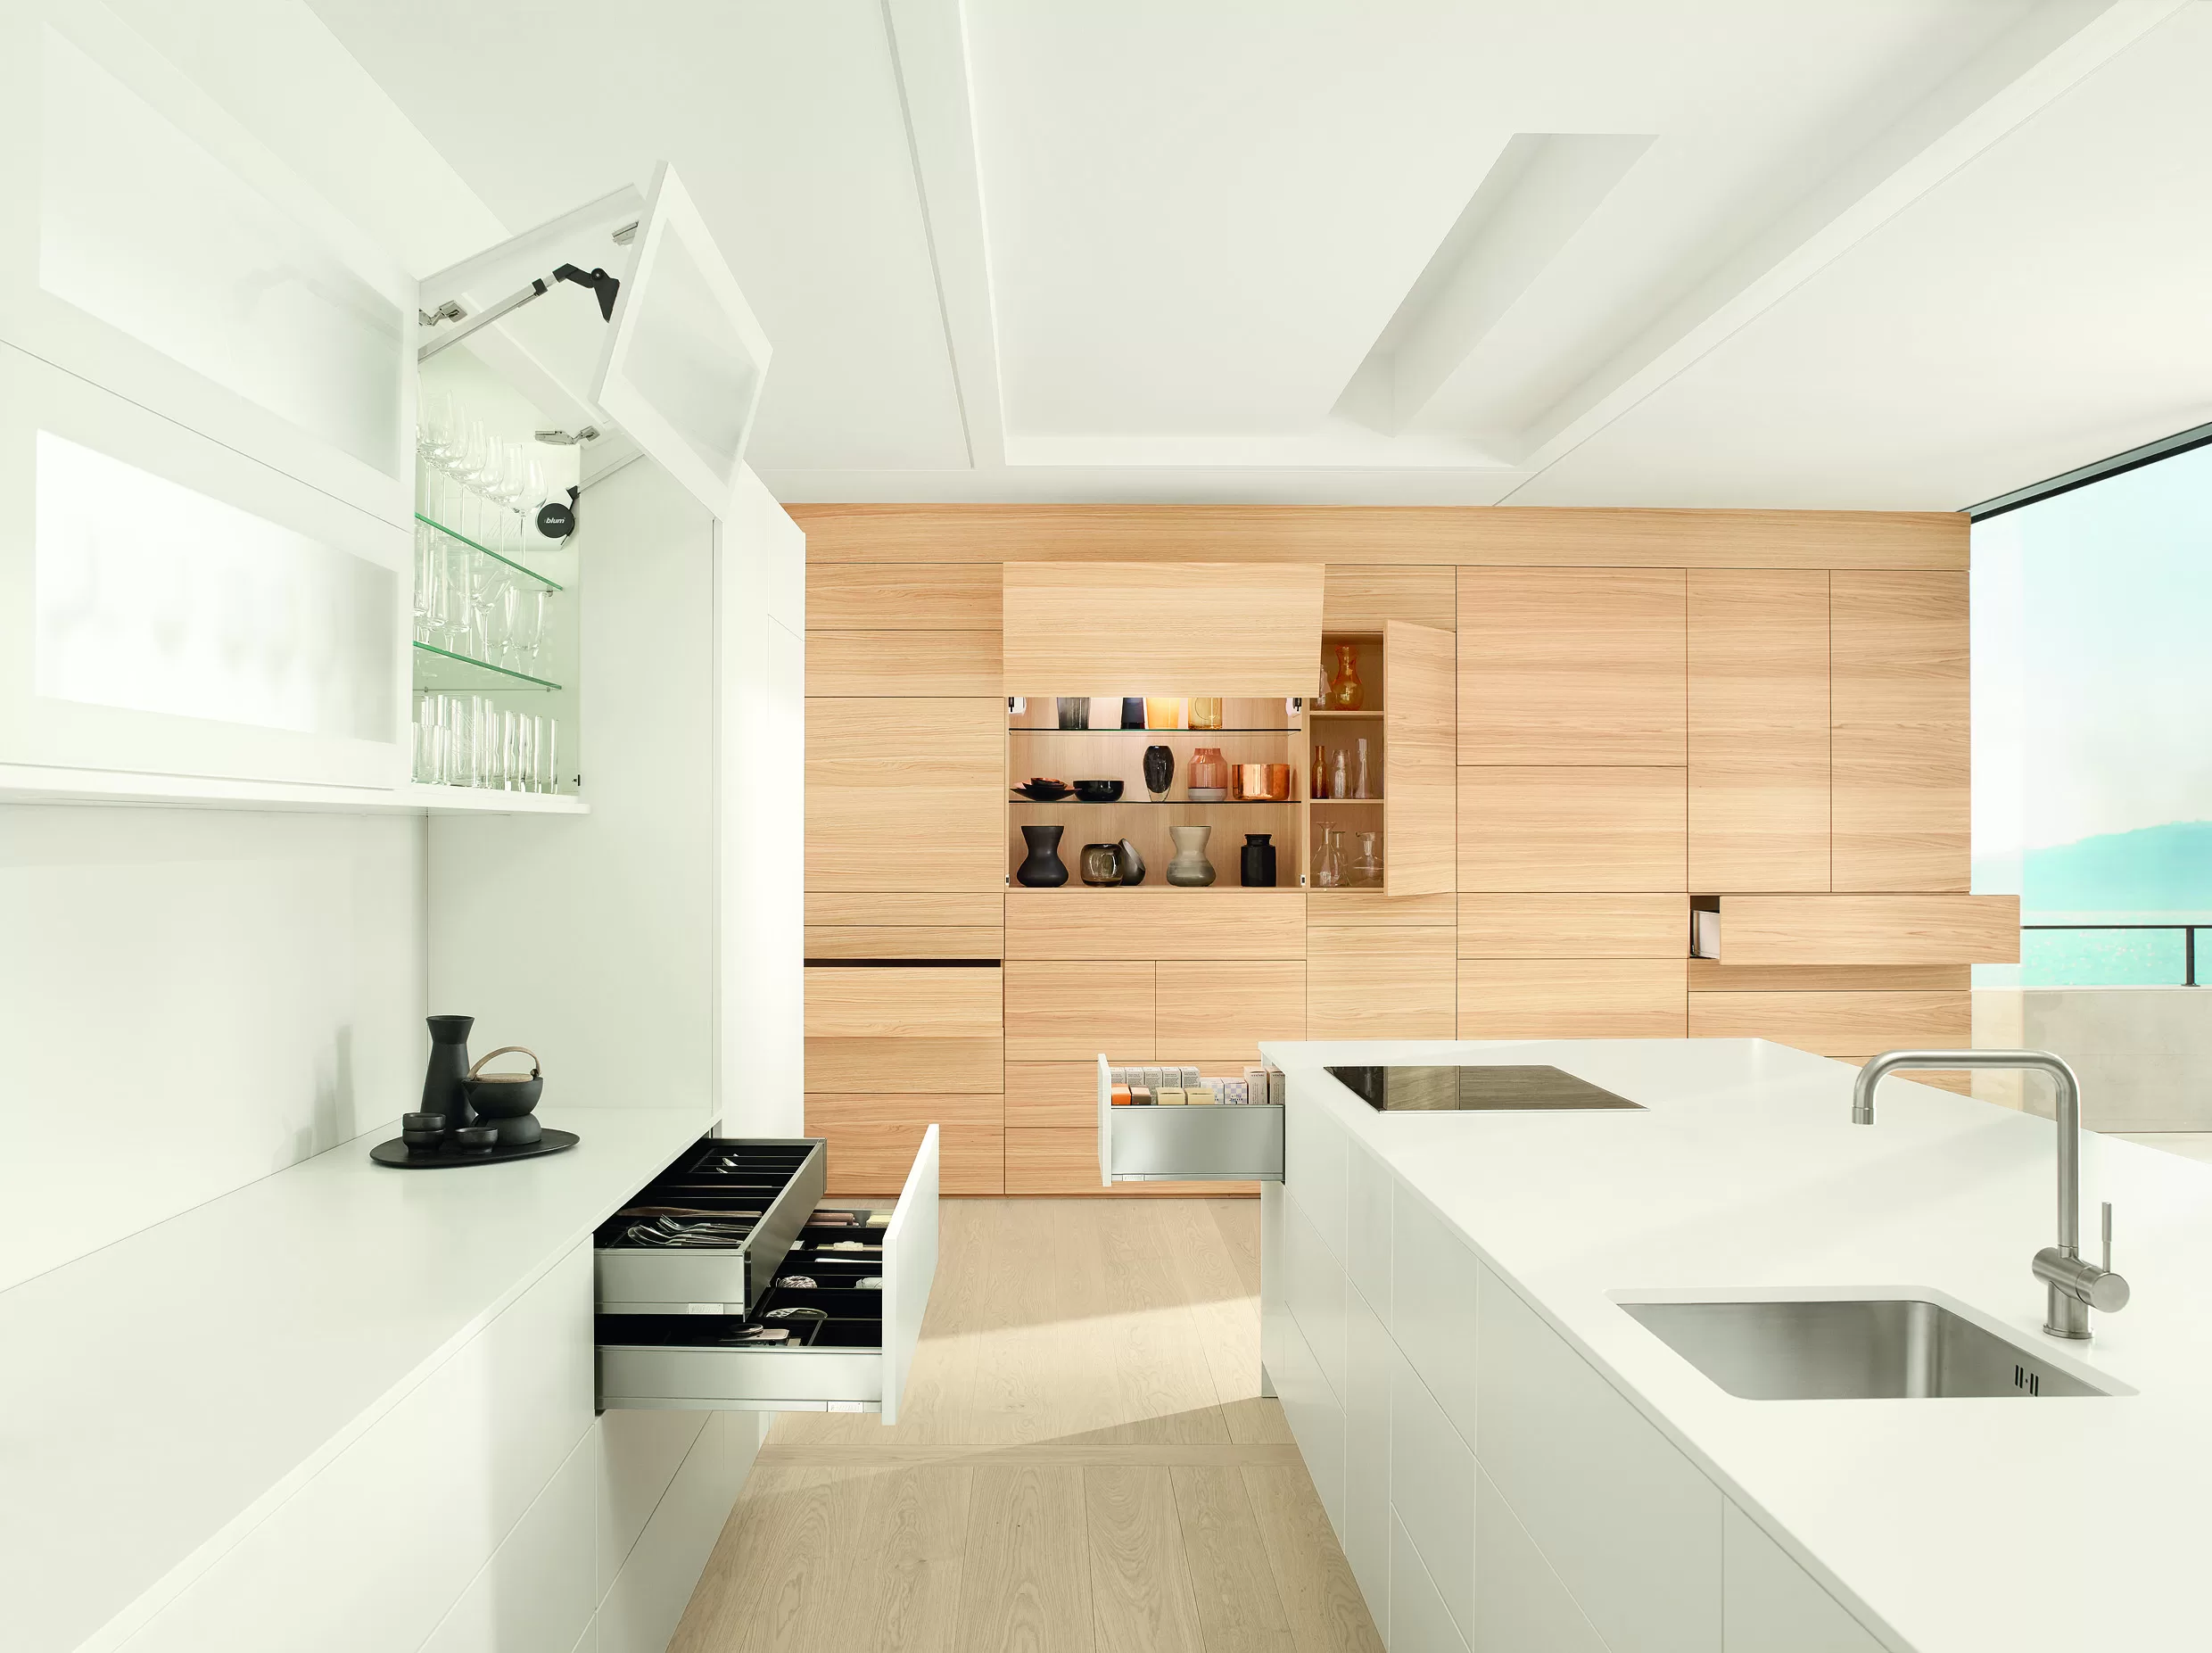 Handle-less kitchens will continue on trend